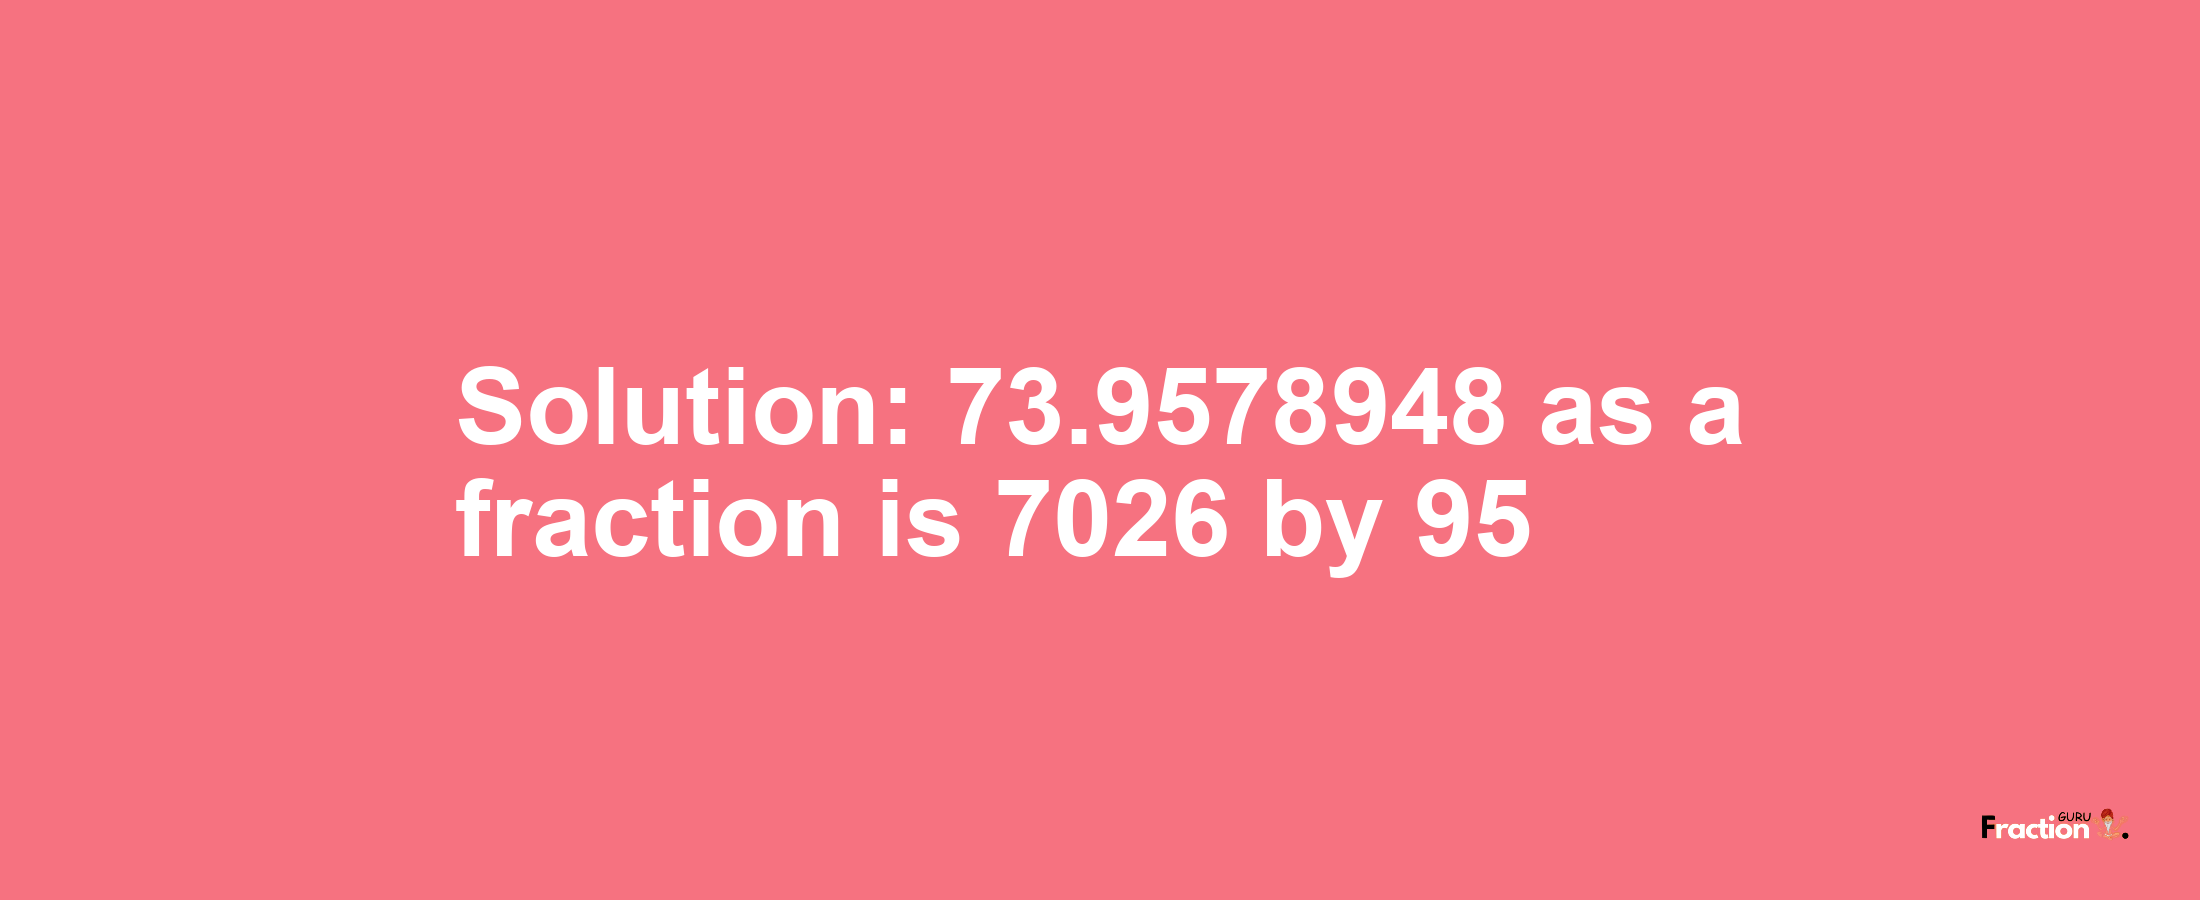 Solution:73.9578948 as a fraction is 7026/95